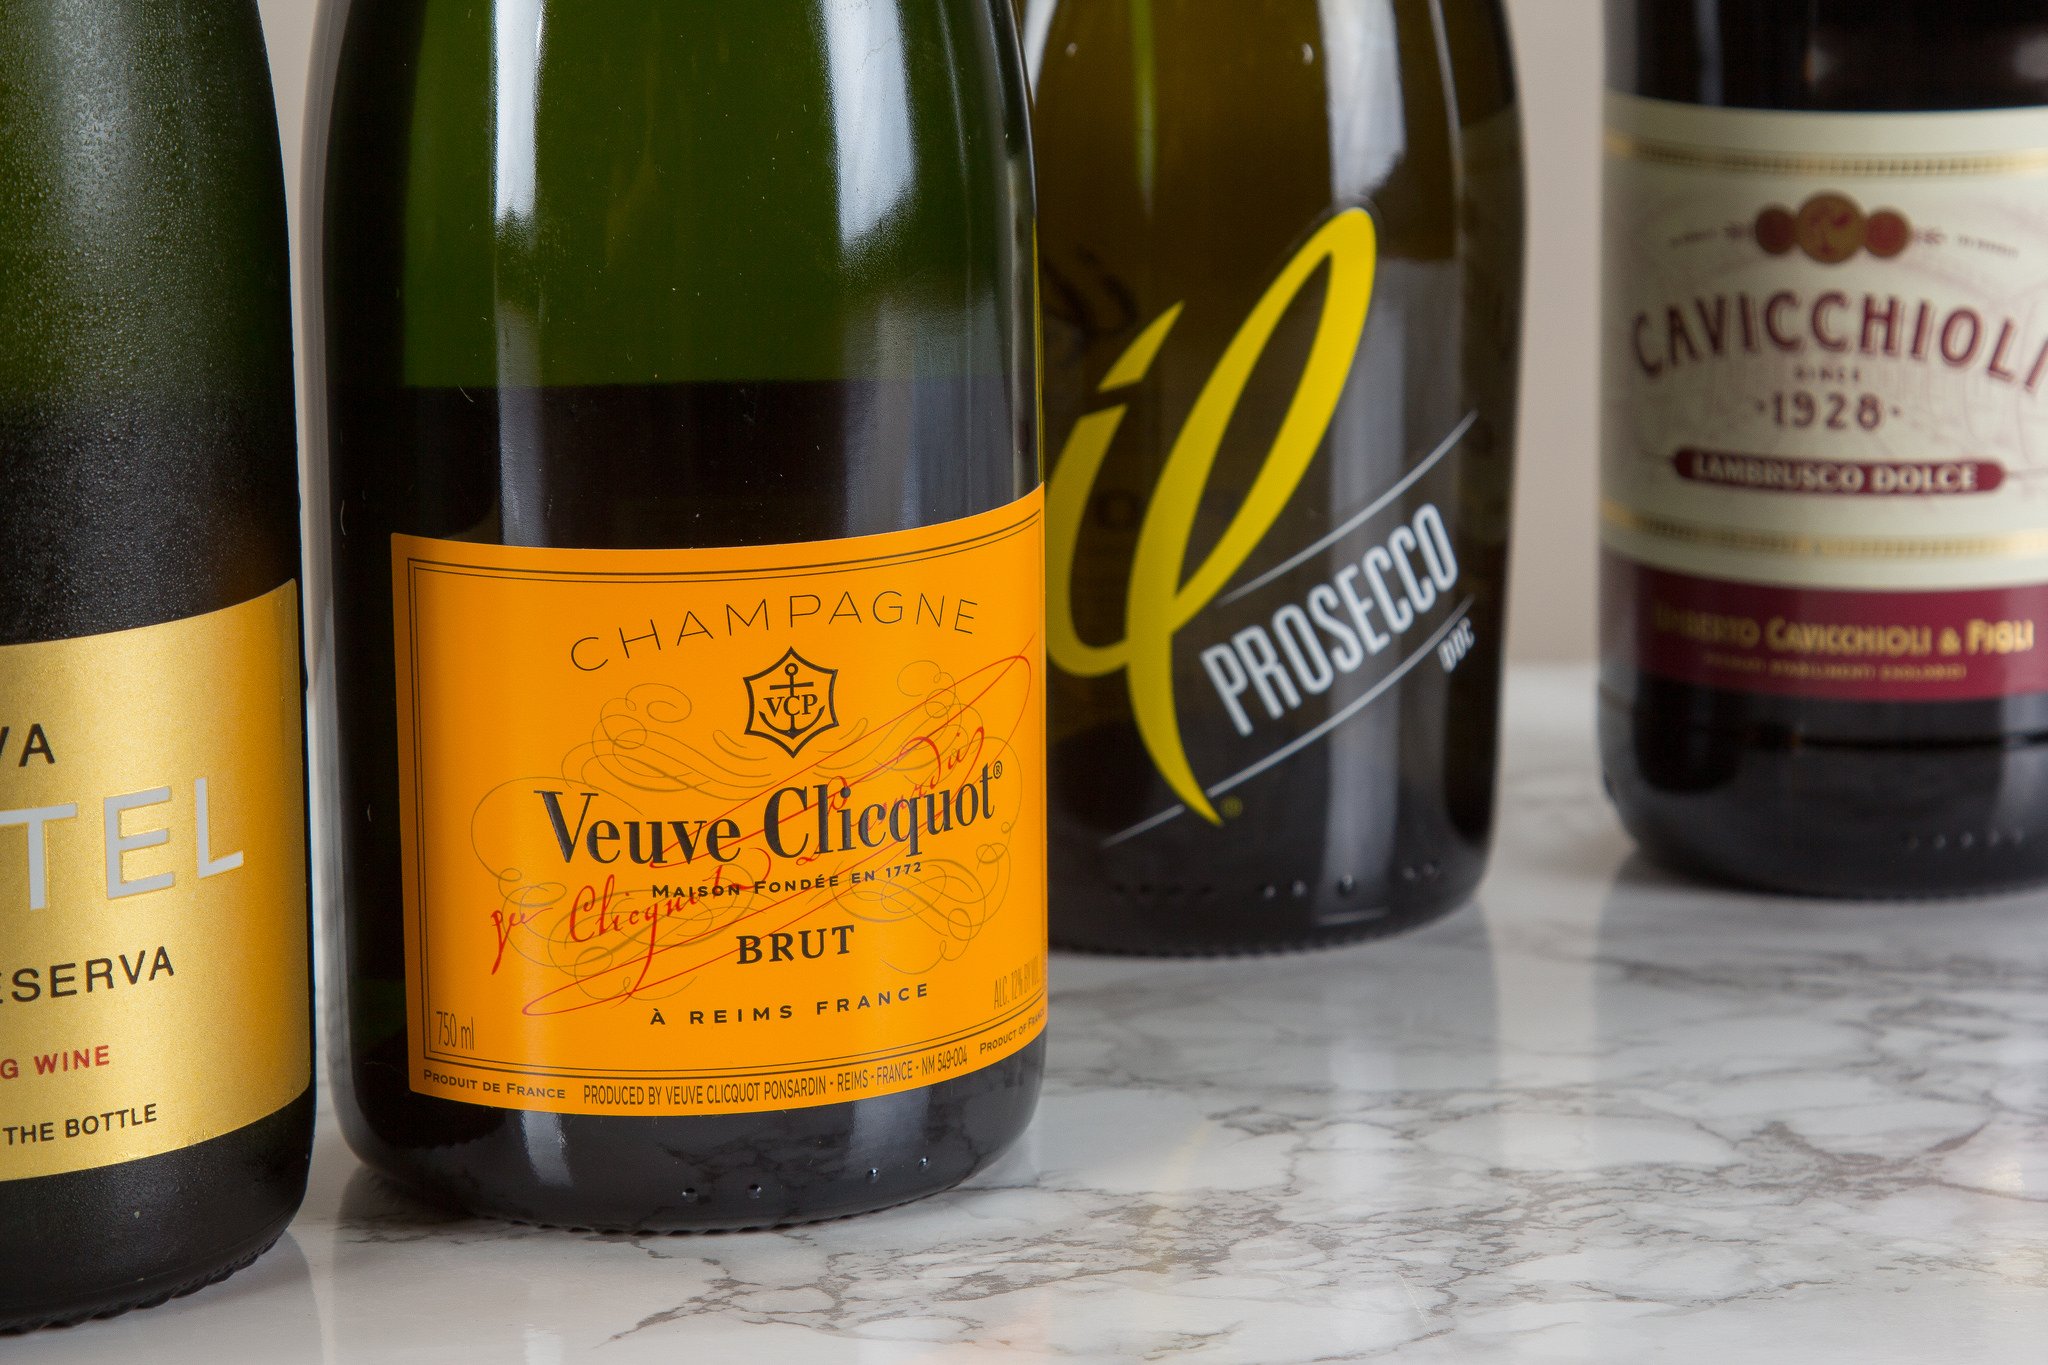 11 Sparkling Wine and Champagne Terms to Help You Pick Better